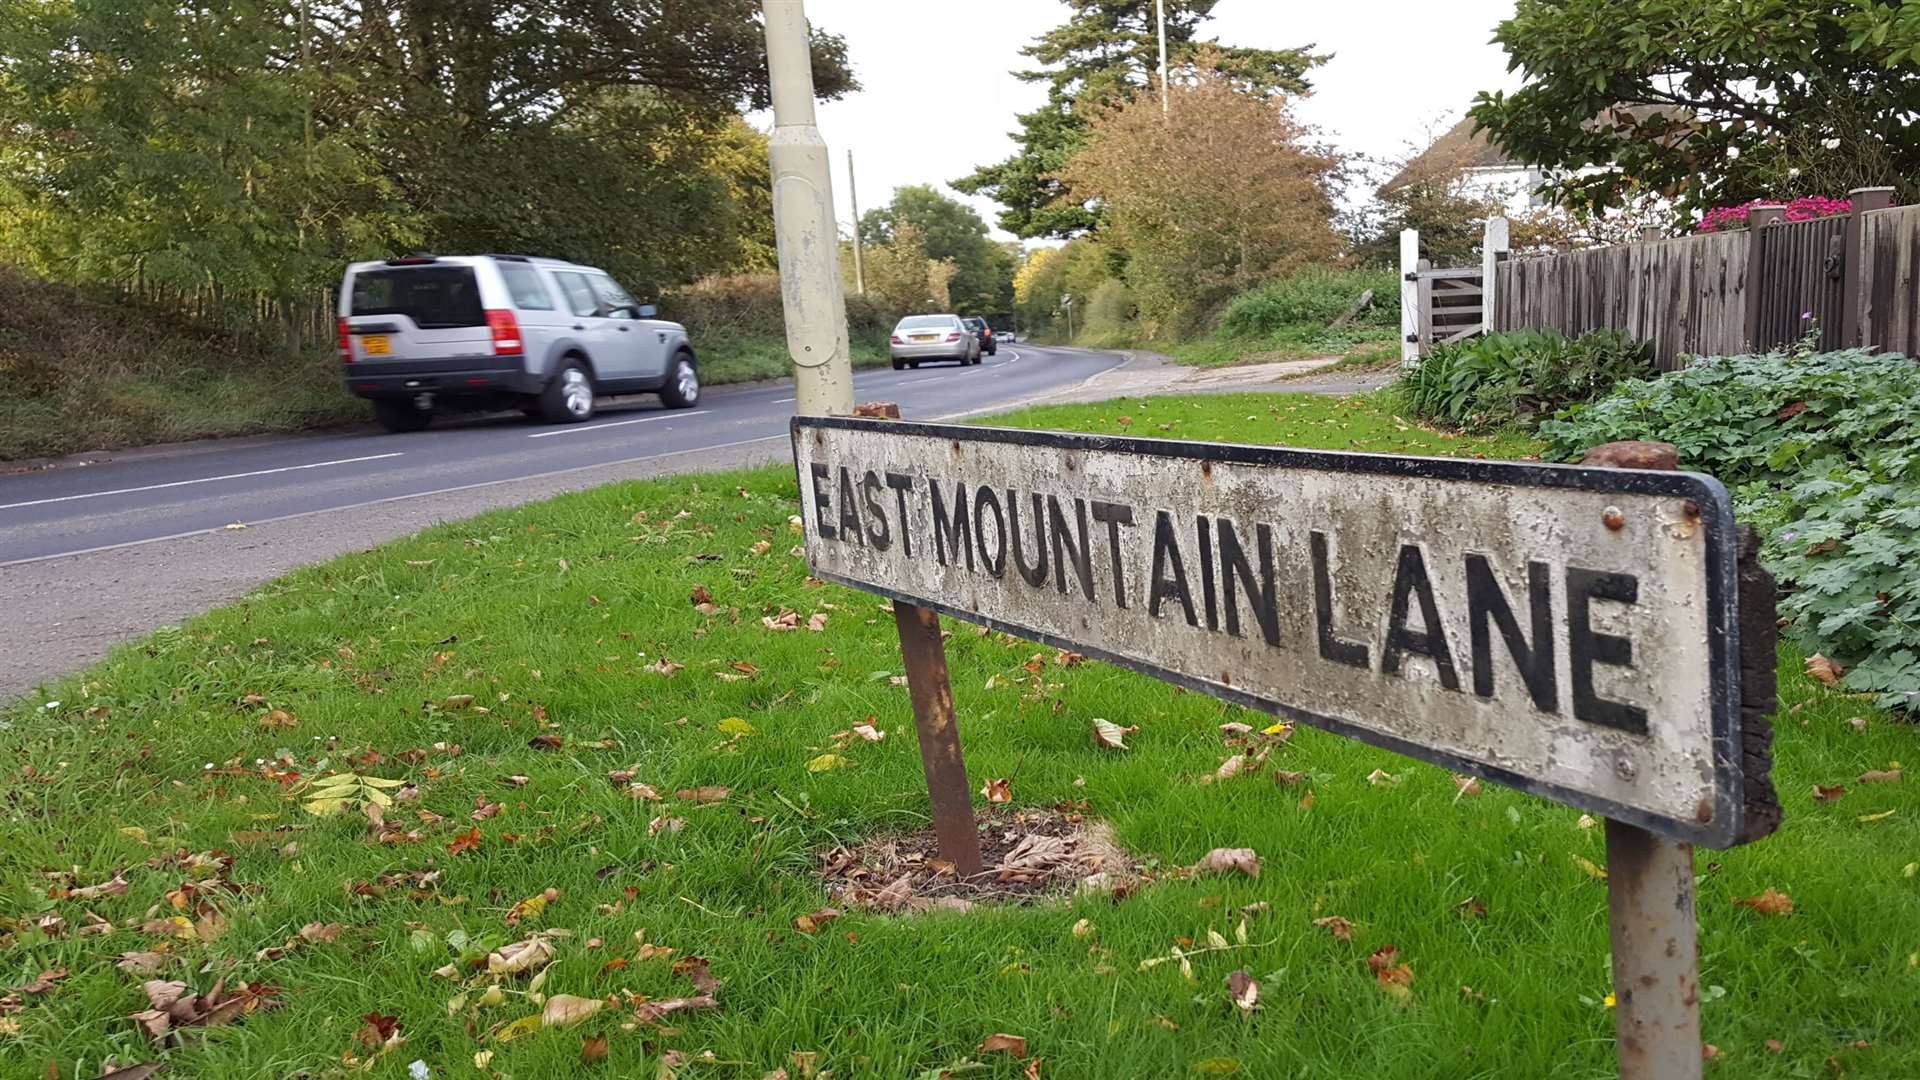 625 homes are proposed off East Mountain Lane